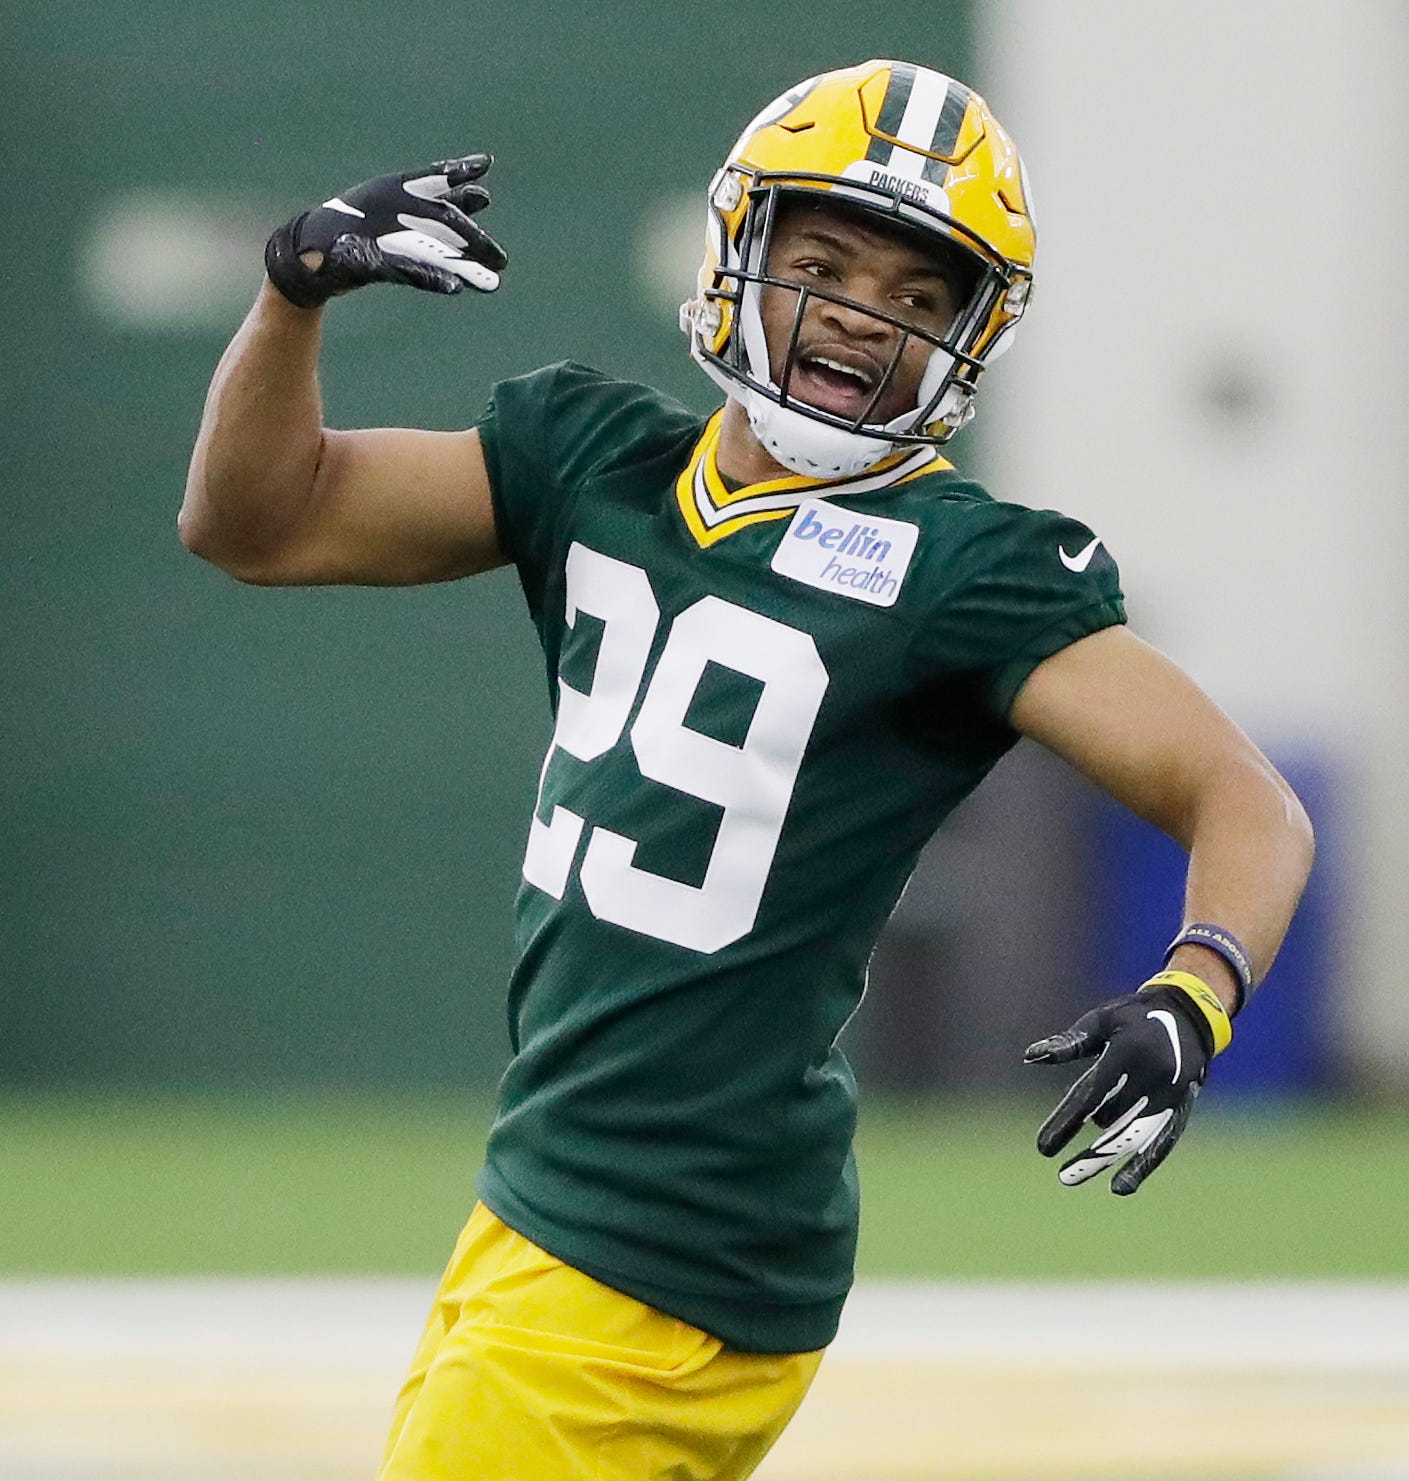 Green Bay Packers cornerback Ka’dar Hollman (29) during practice at rookie minicamp at the Don Hutson Center on Friday, May 3, 2019 in Ashwaubenon, Wis.
Adam Wesley/USA TODAY NETWORK-Wis